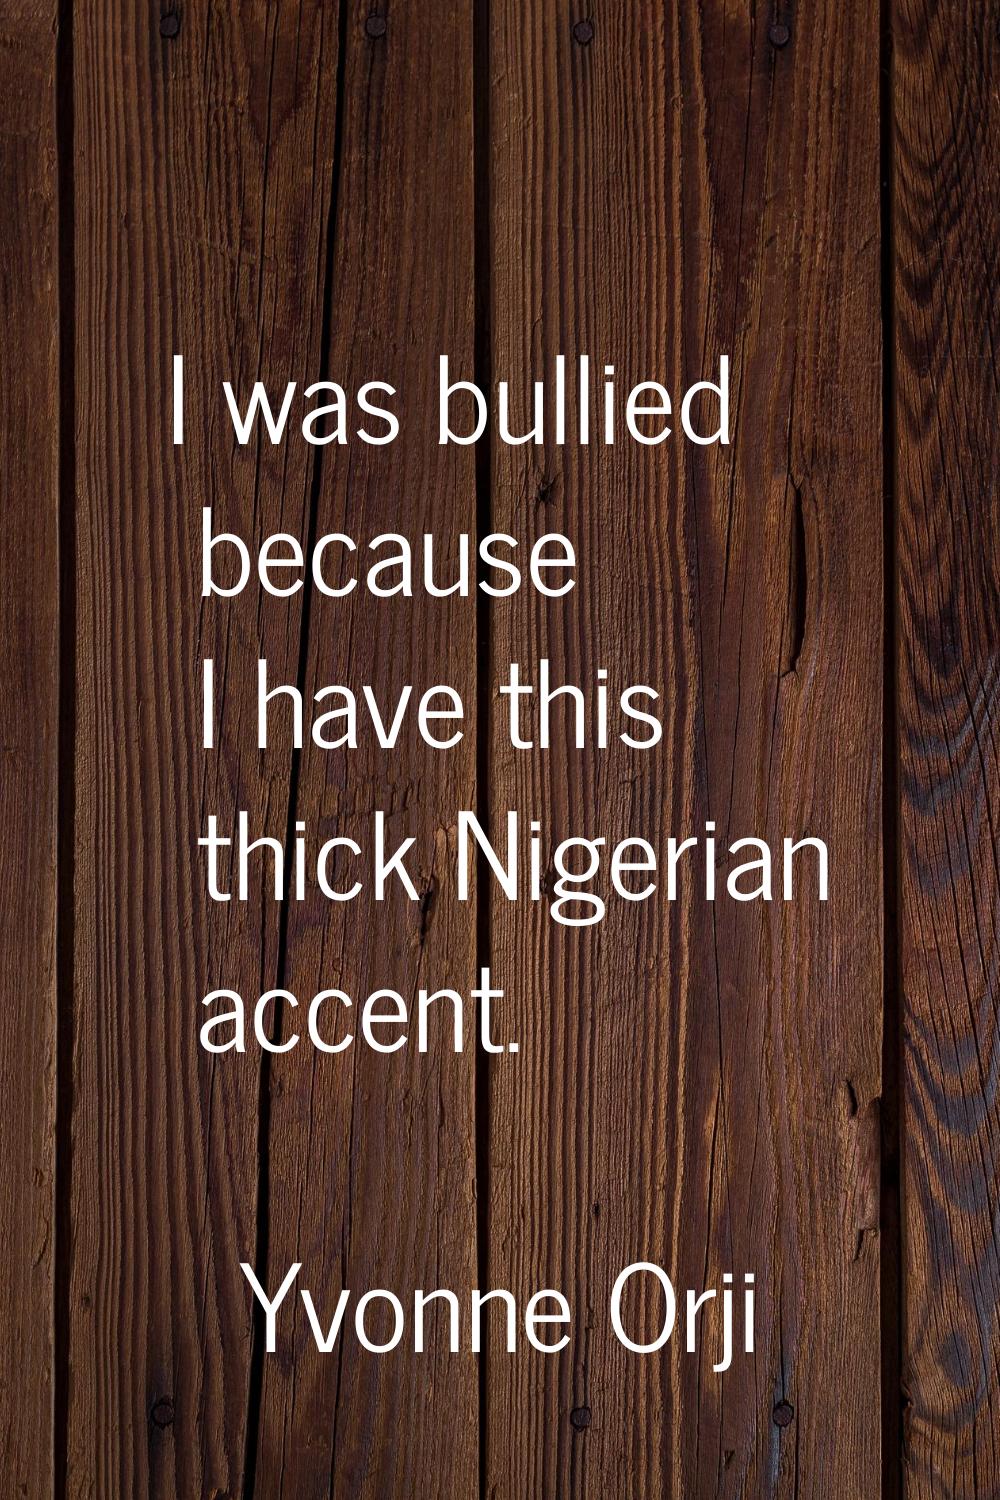 I was bullied because I have this thick Nigerian accent.